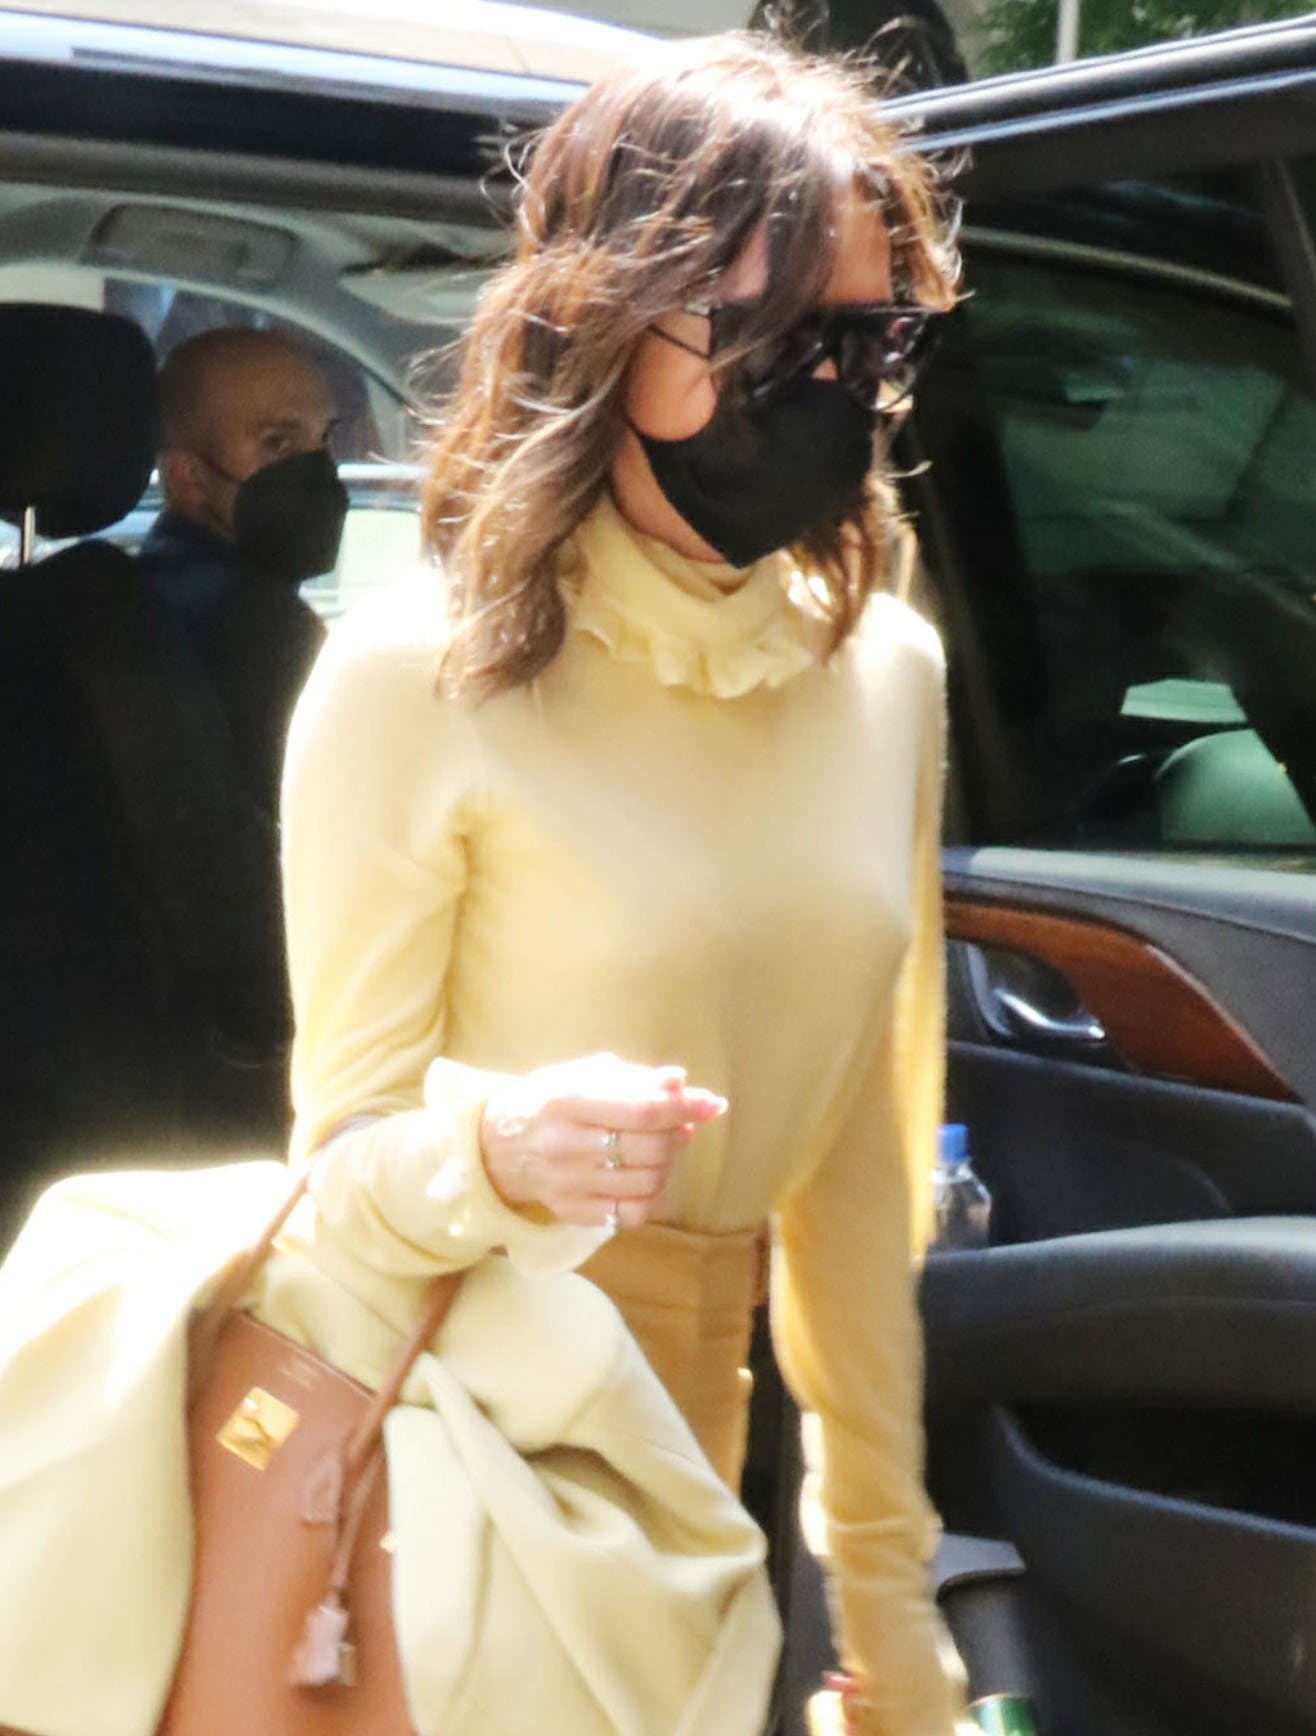 Victoria Beckham styles her hair in curls and keeps a low profile with retro sunnies and a face mask